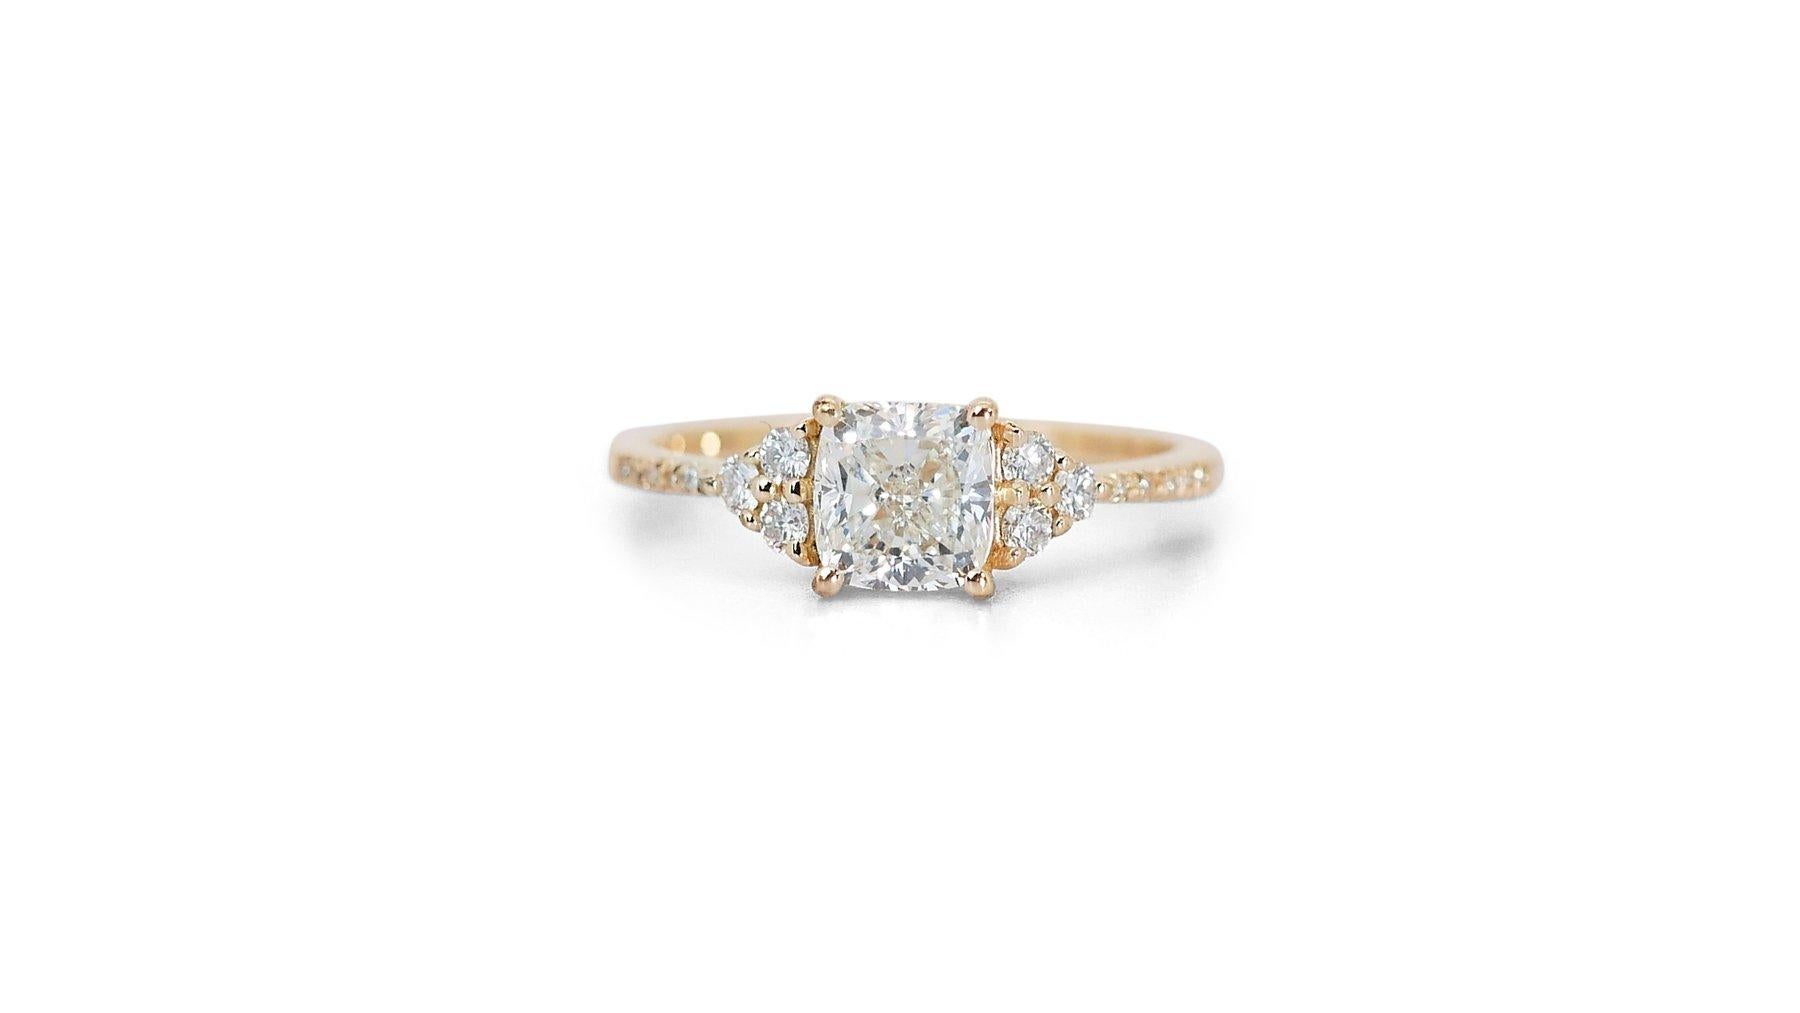 Luminous 1.98ct Diamonds Pave Ring in 18k Yellow Gold - GIA Certified For Sale 3